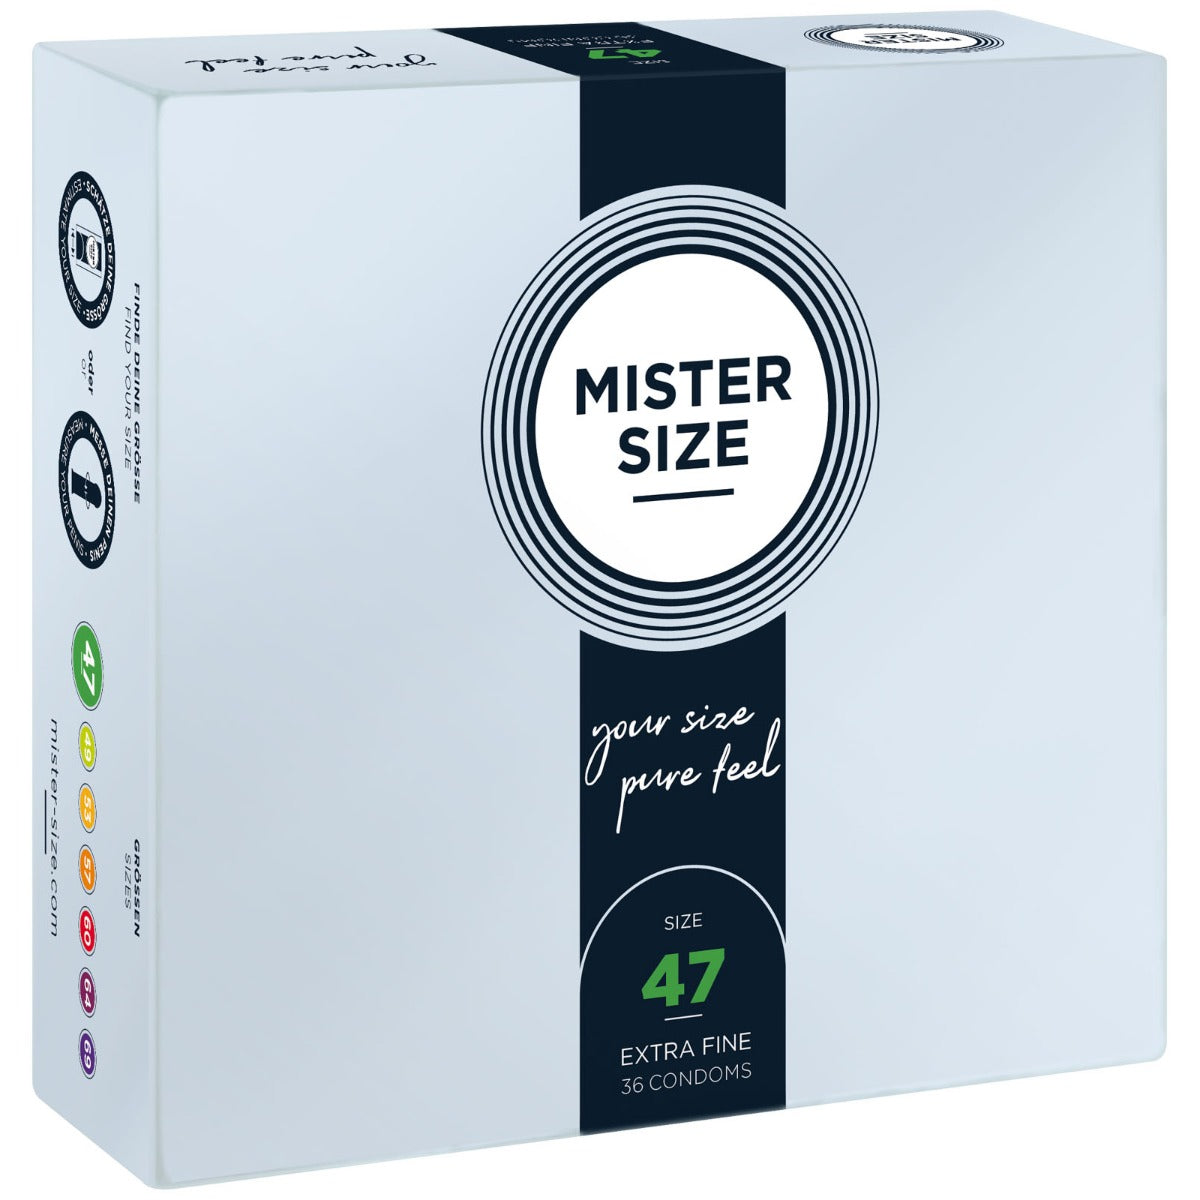 Condoms MISTER SIZE - pure feel Condoms - size 47 mm (36 pack)   